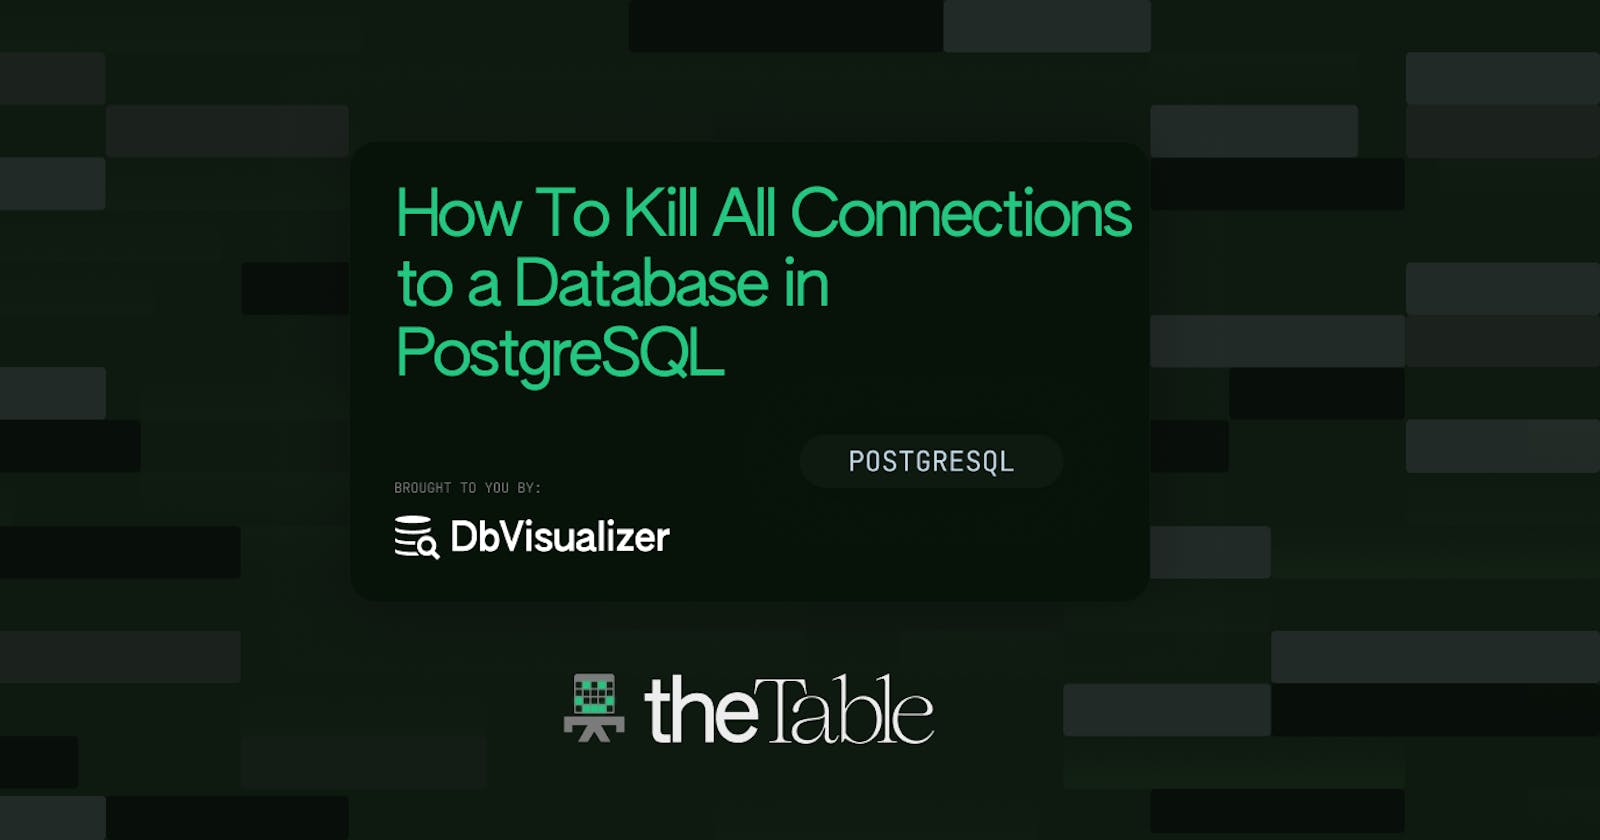 How To Kill All Connections to a Database in PostgreSQL